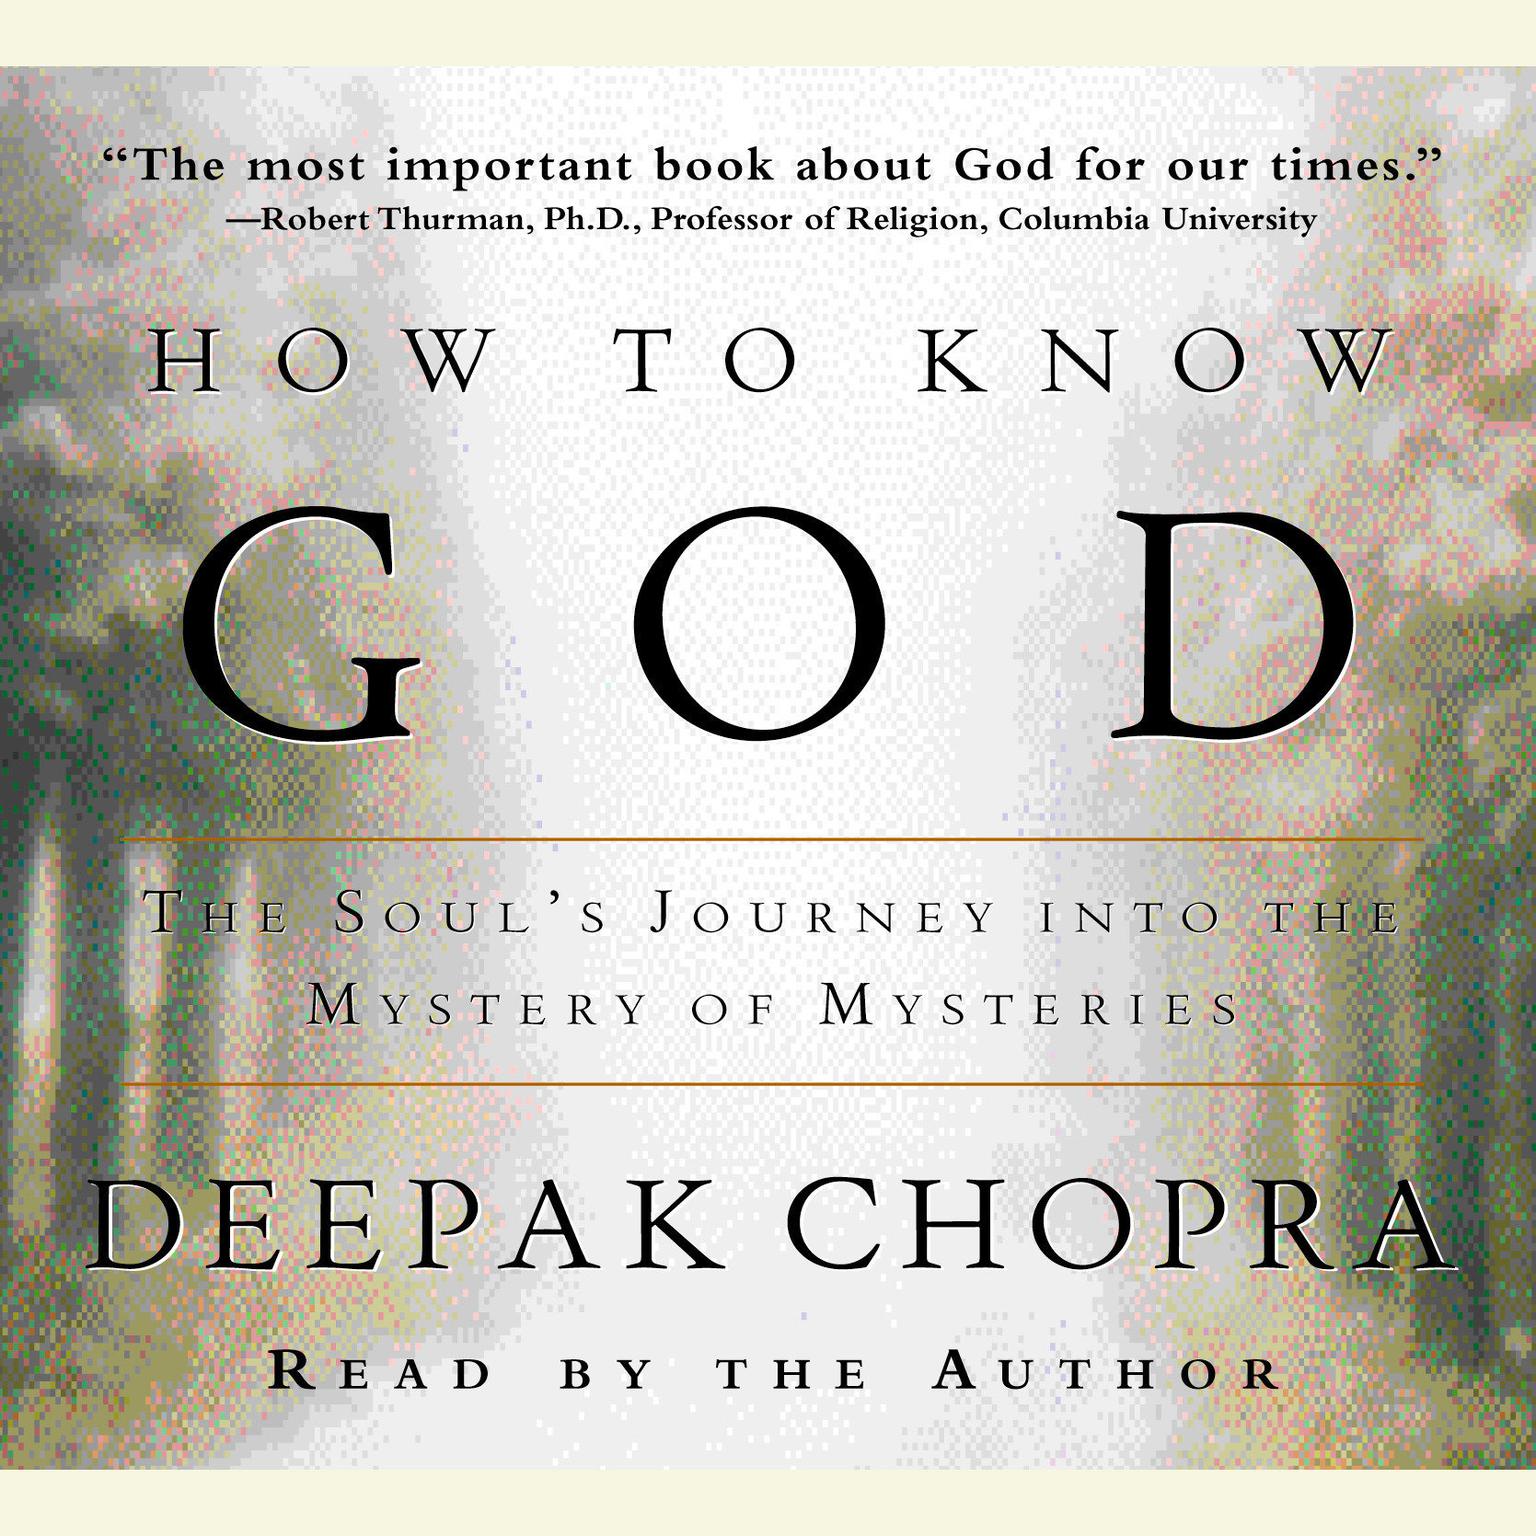 How to Know God (Abridged): The Souls Journey Into the Mystery of Mysteries Audiobook, by Deepak Chopra